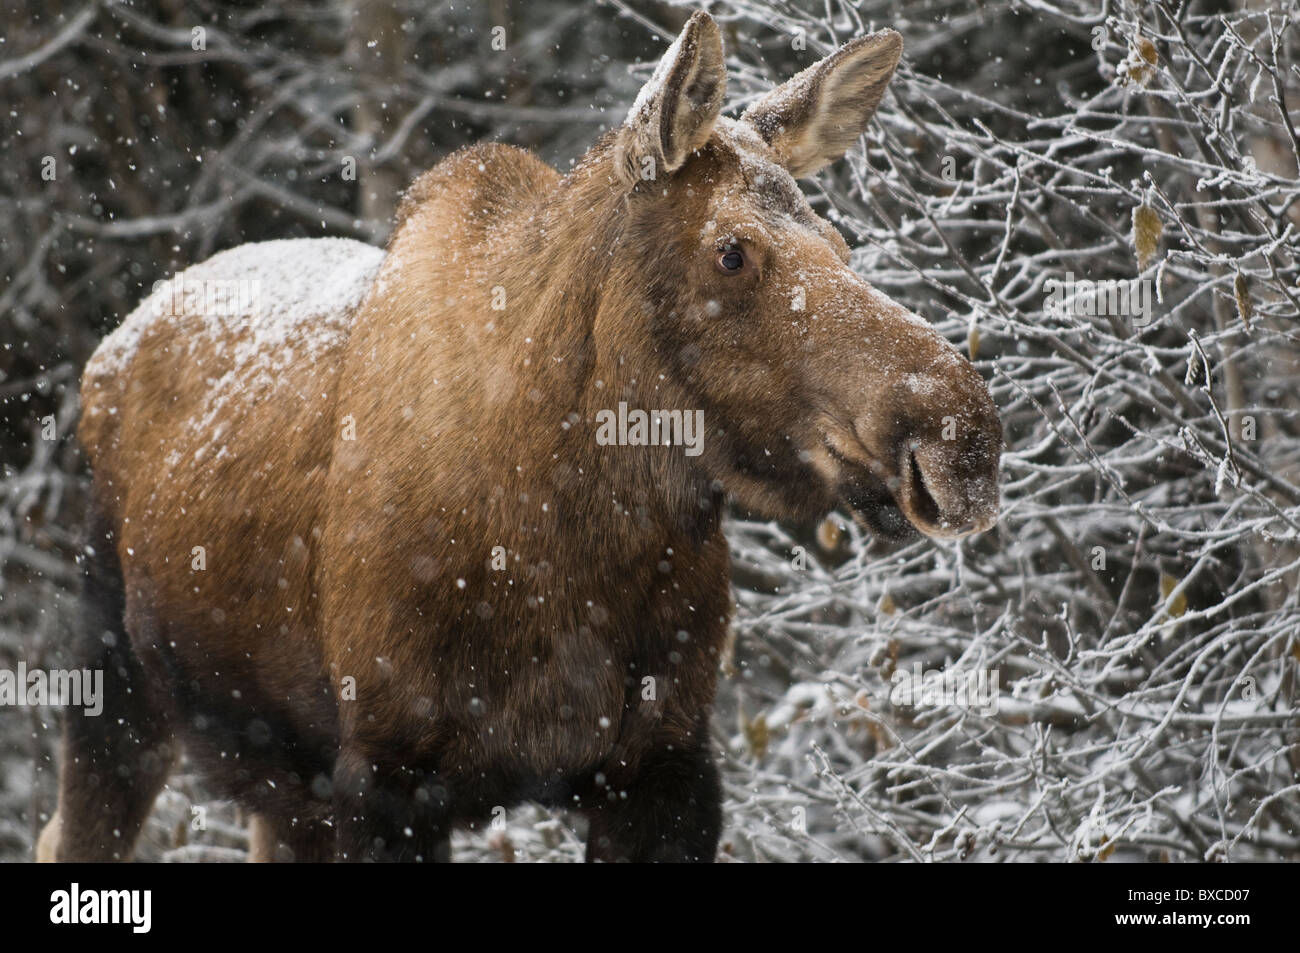 A moose browses on branches while a fresh blanket of snow falls during a chilly winter afternoon in Anchorage, Alaska. Stock Photo